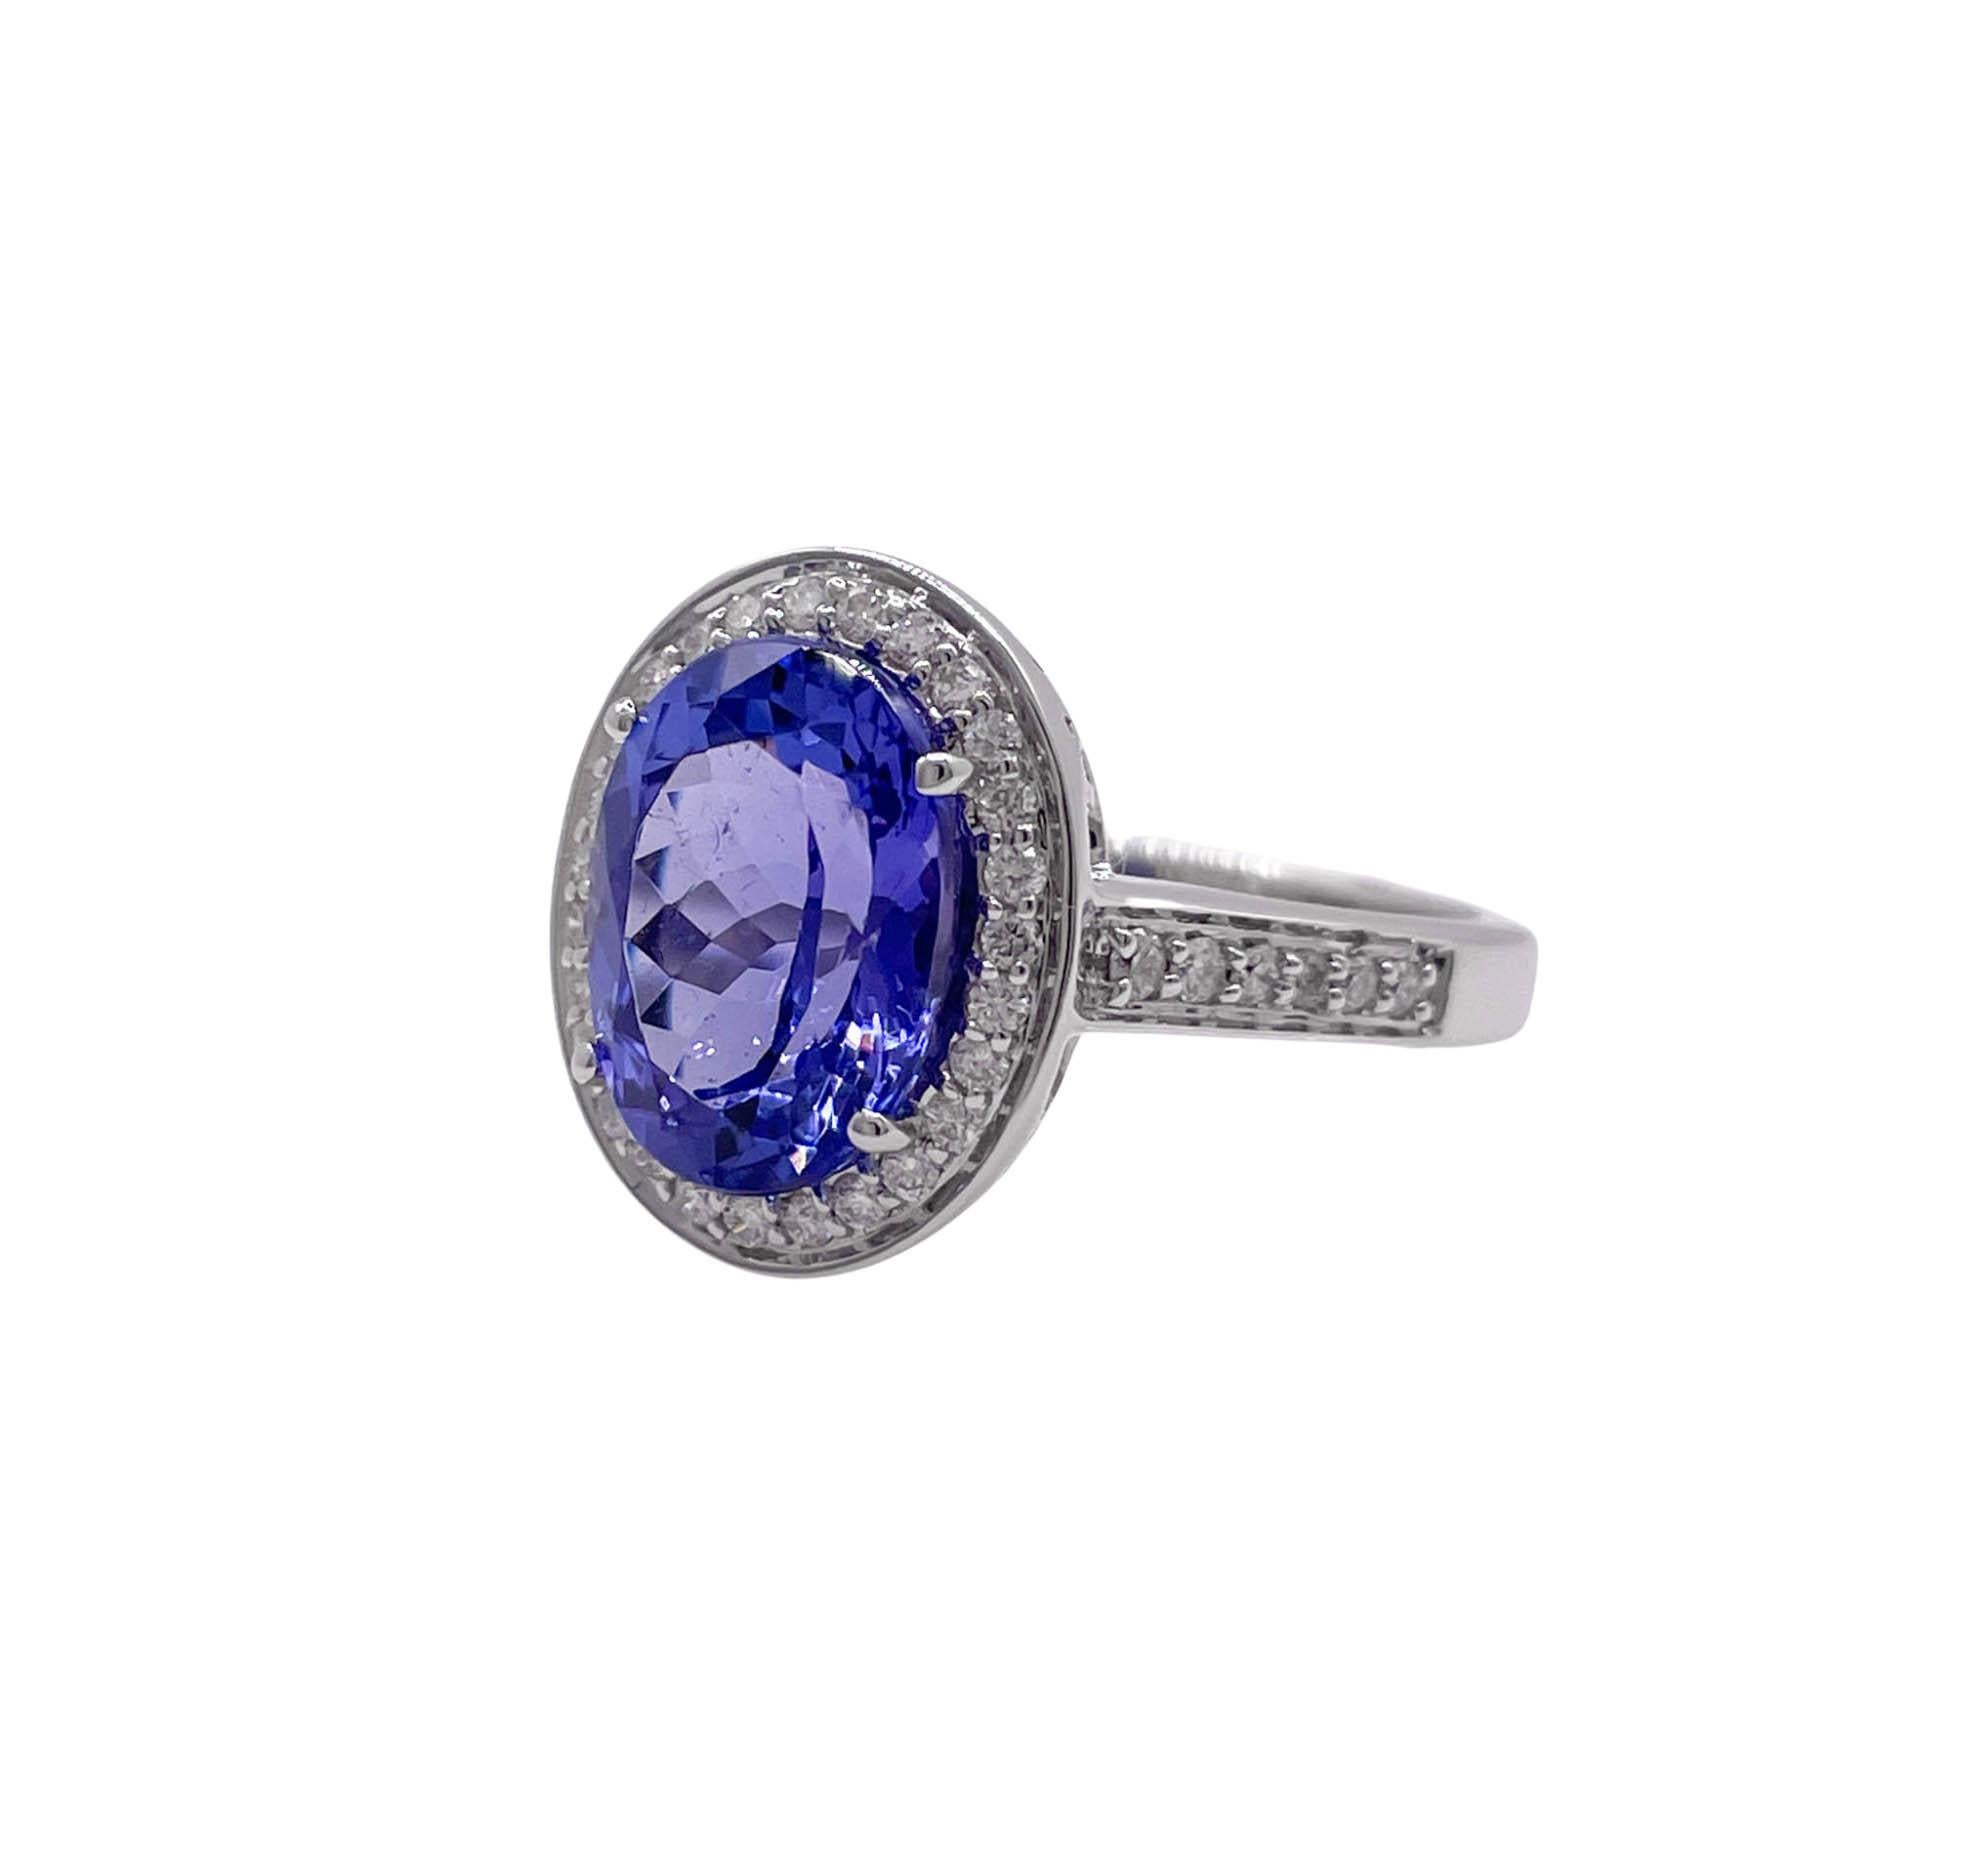 Oval Cut Jay Feder 14k White Gold Tanzanite Diamond Halo Engagement Right Hand Ring 